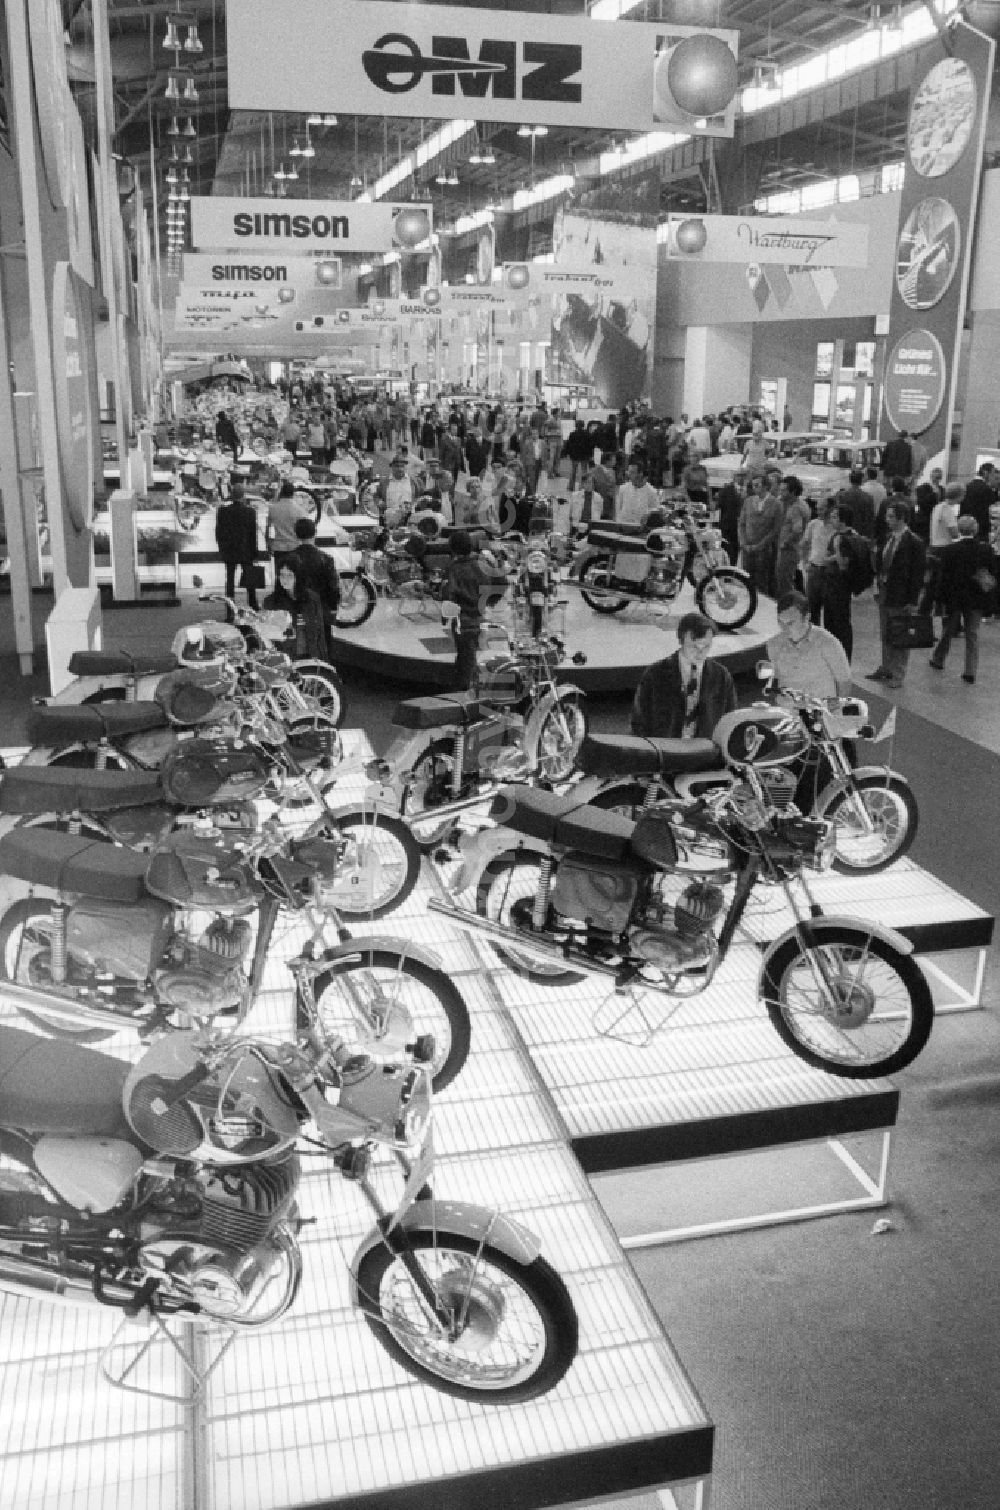 GDR photo archive: Leipzig - GDR motorcycles and mopeds branded Simson and MZ at the Leipzig autumn fair in Leipzig in Saxony in the area of the former GDR, German Democratic Republic